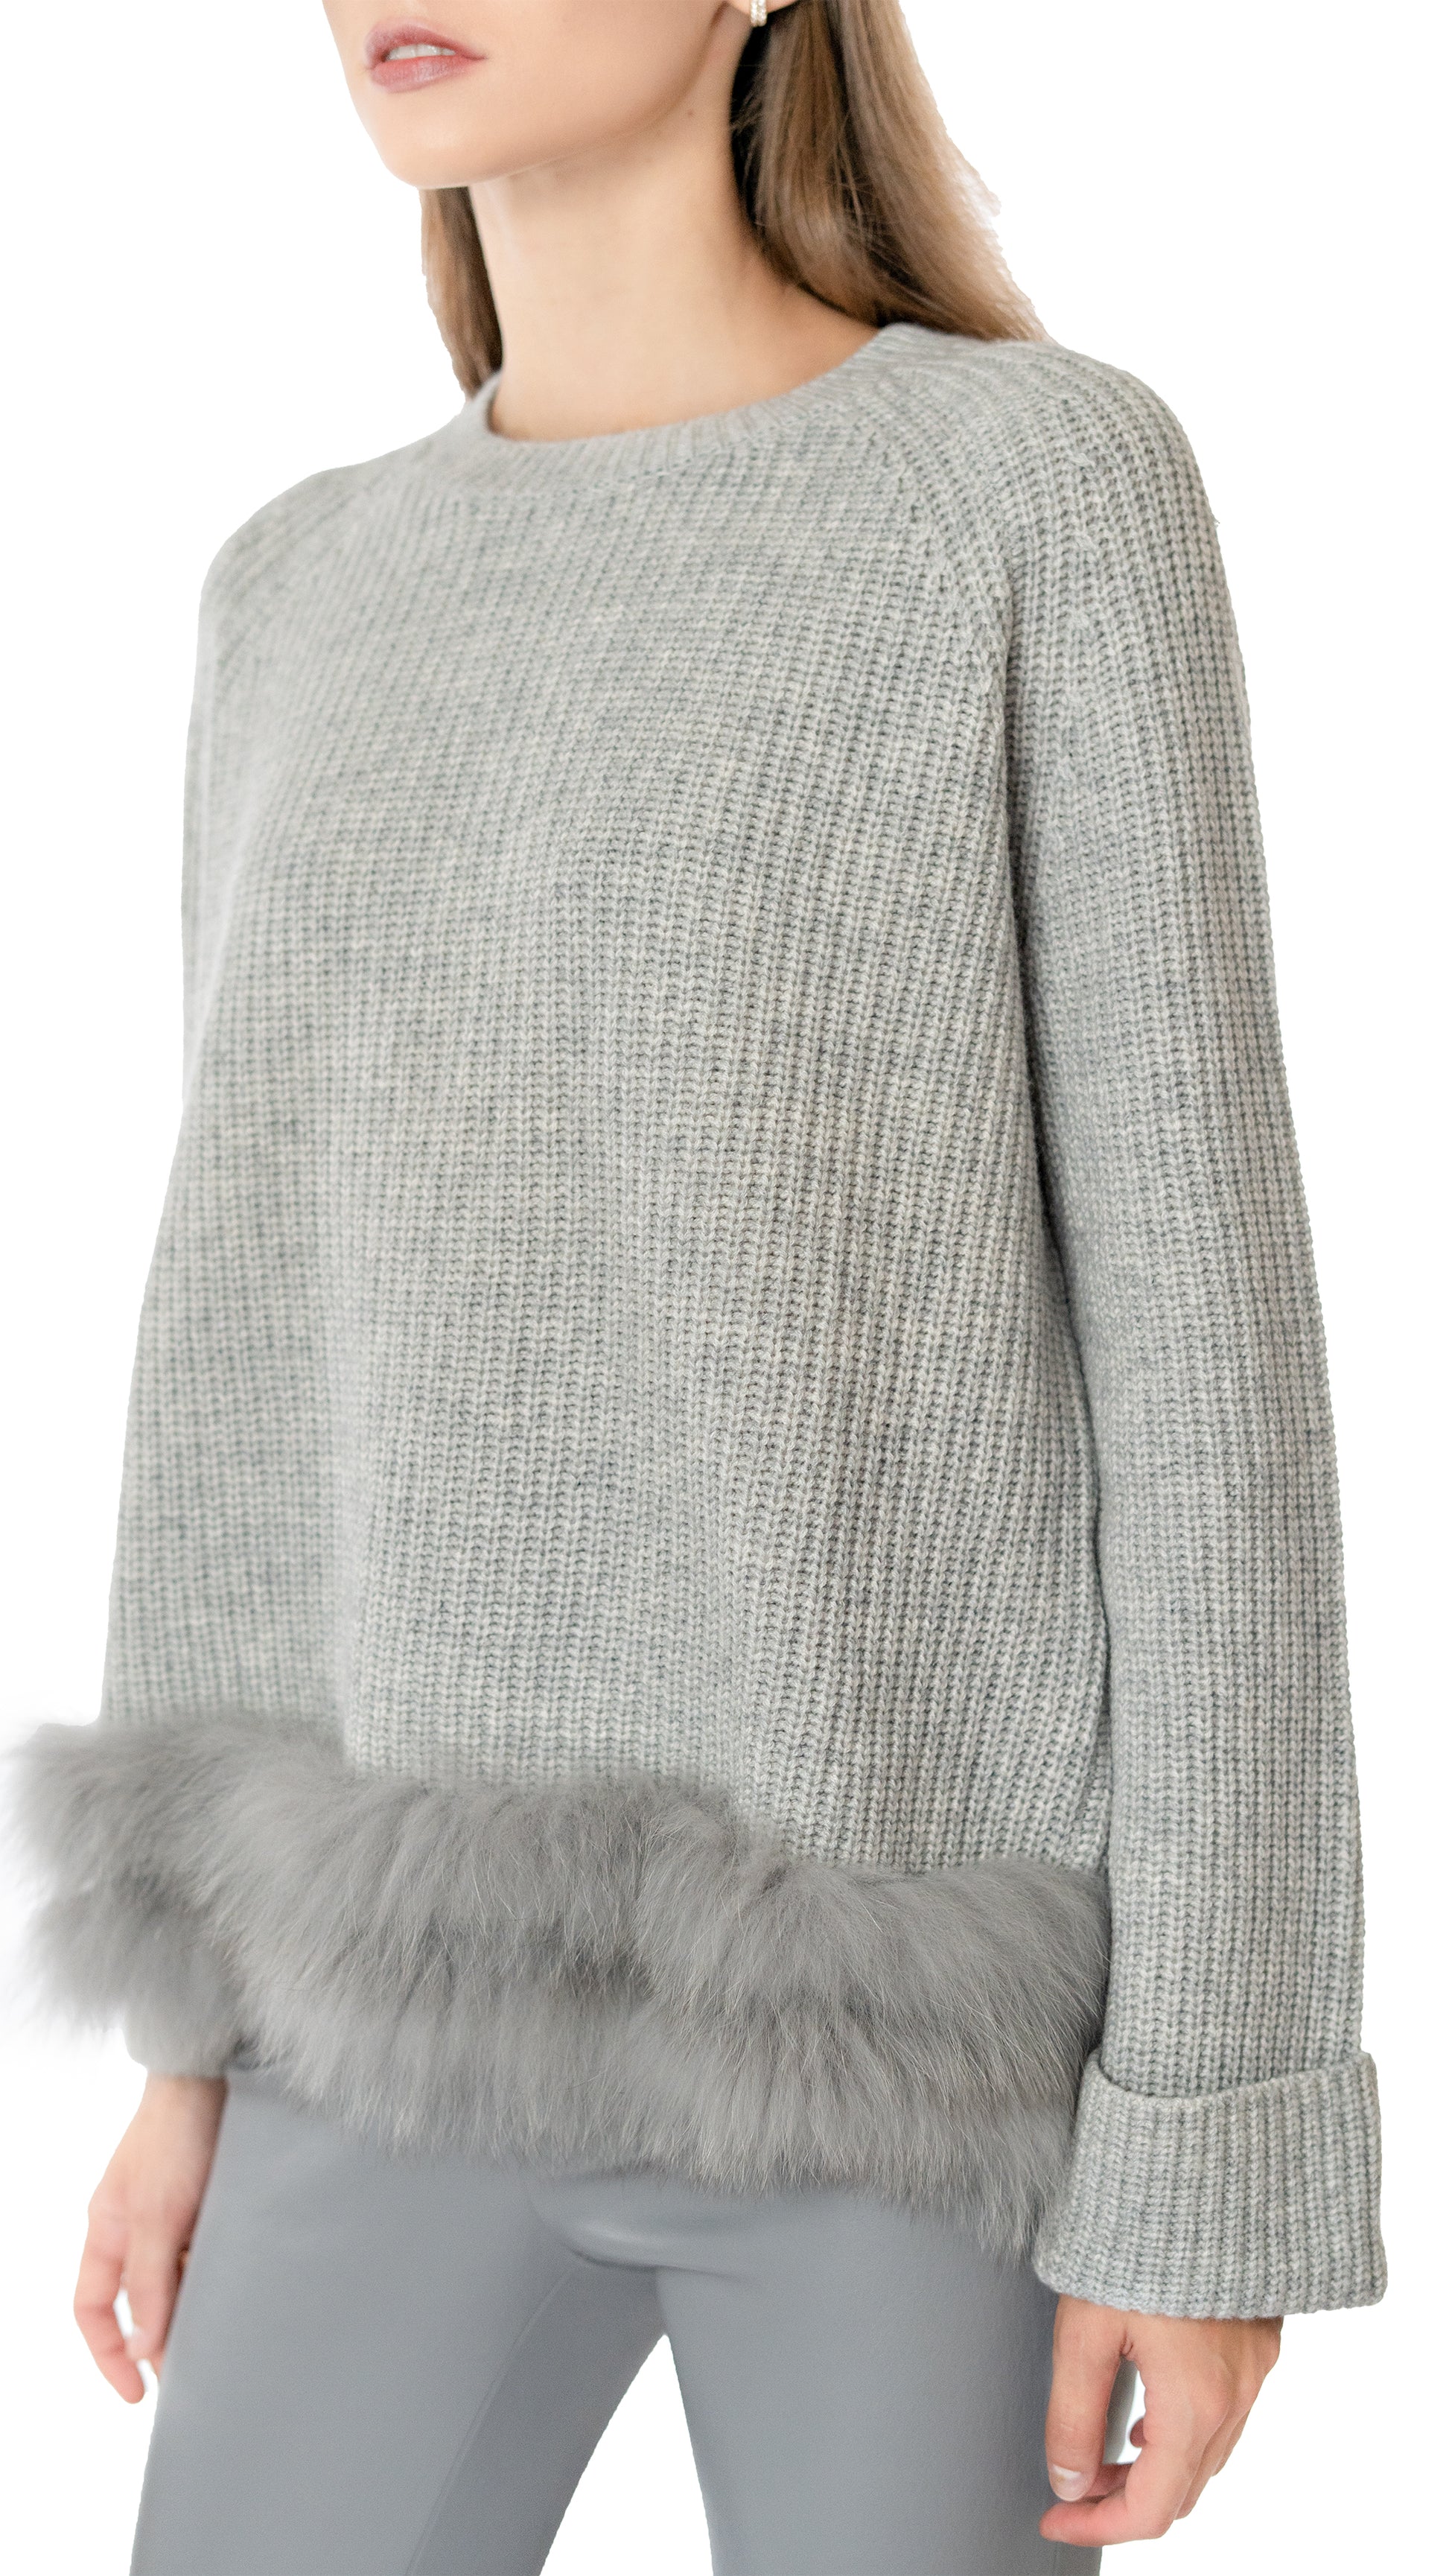 Max and Moi crew neck sweater  with tone-on-tone fox fur applied to the bottom of the sweater